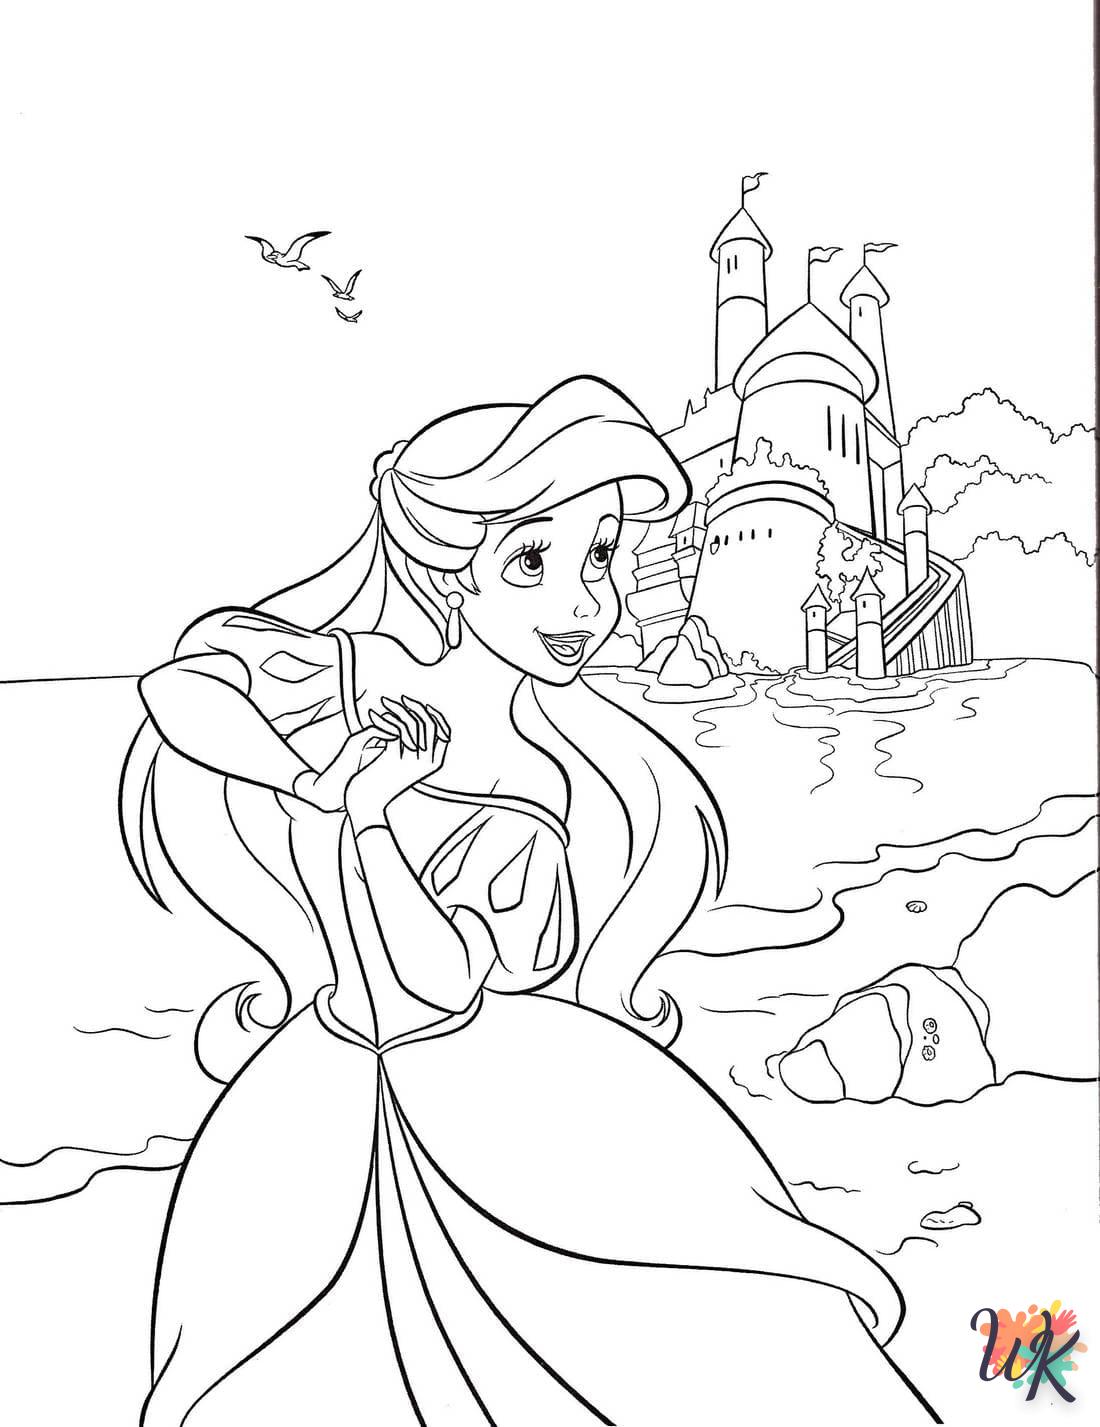 Disney coloring for children to print 1